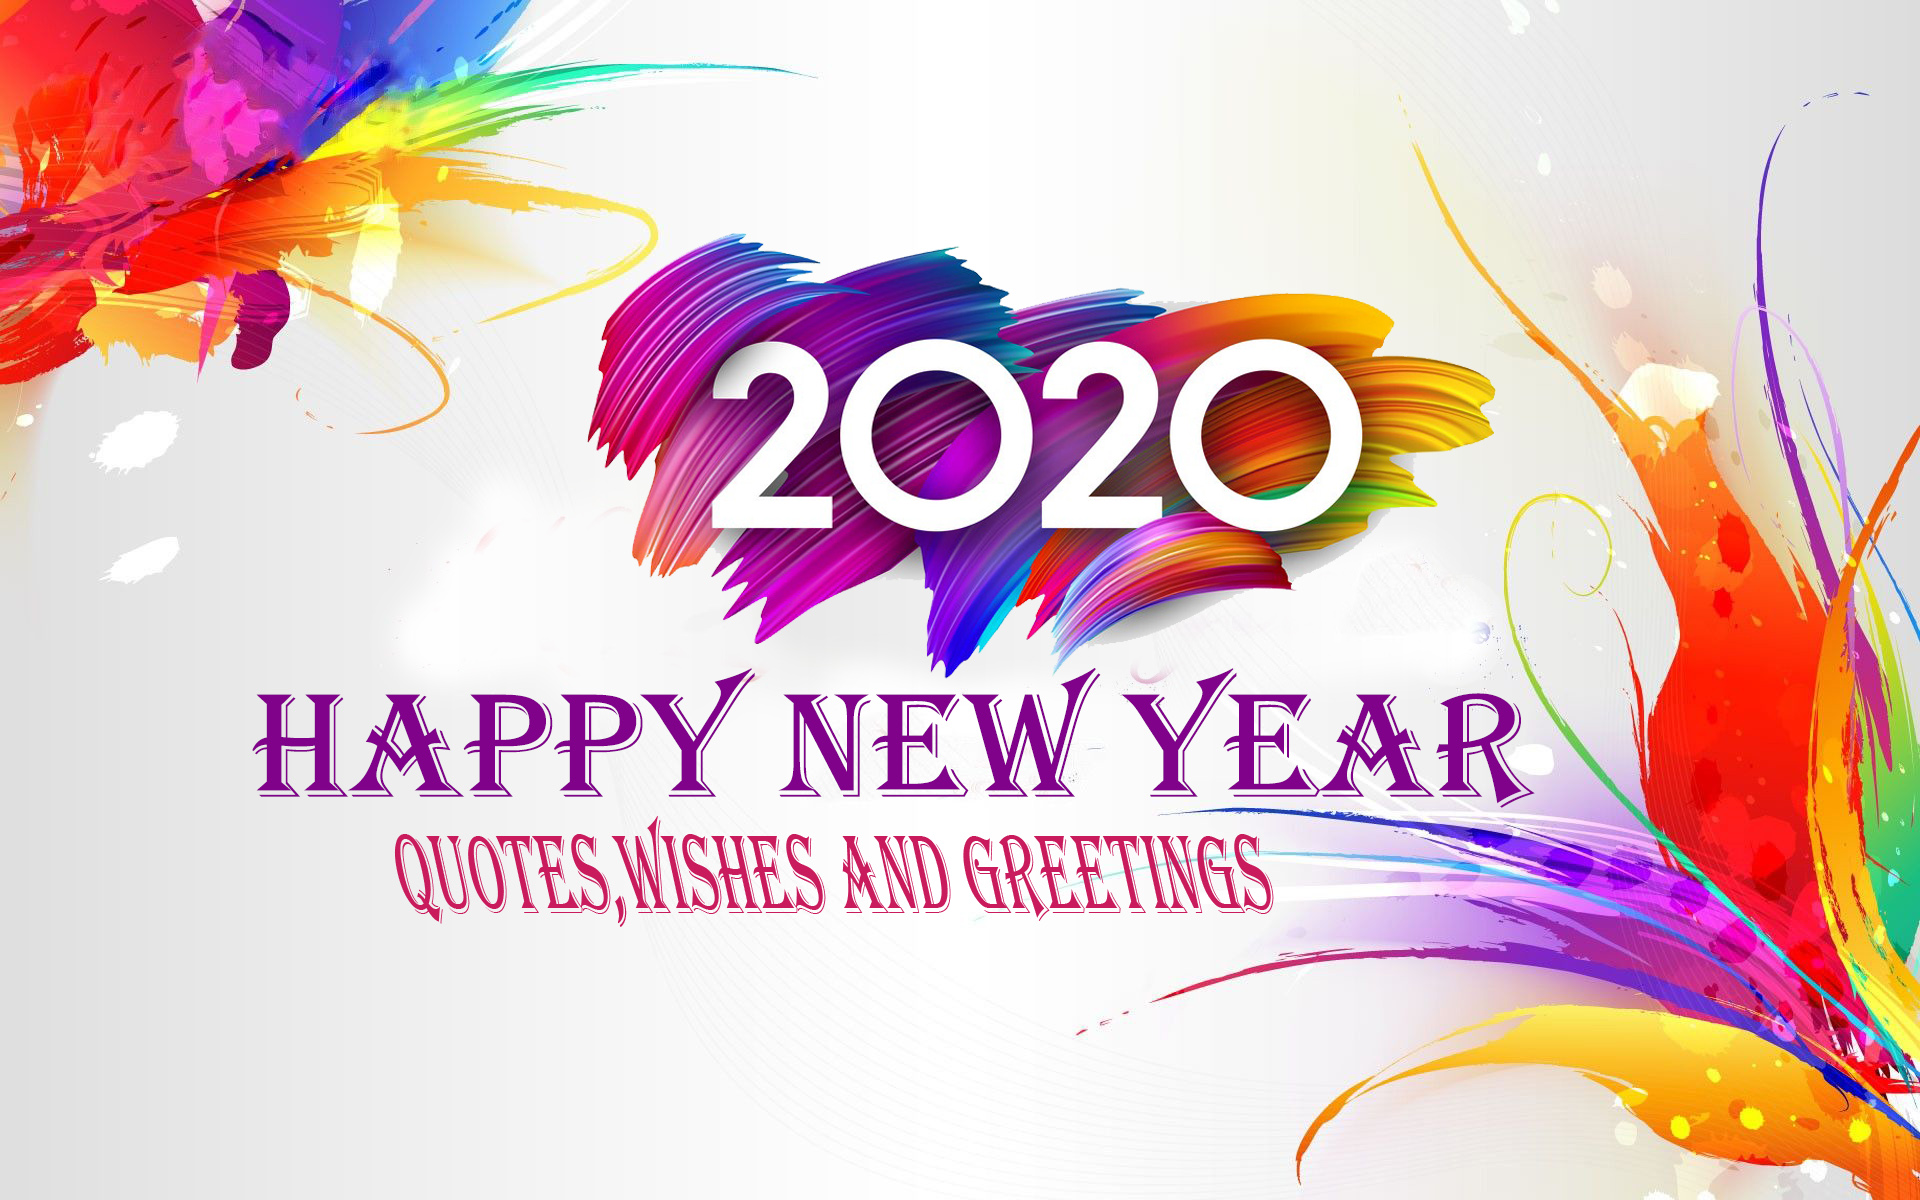 Free download Happy New Year 2020 Quotes Images Wishes and ...